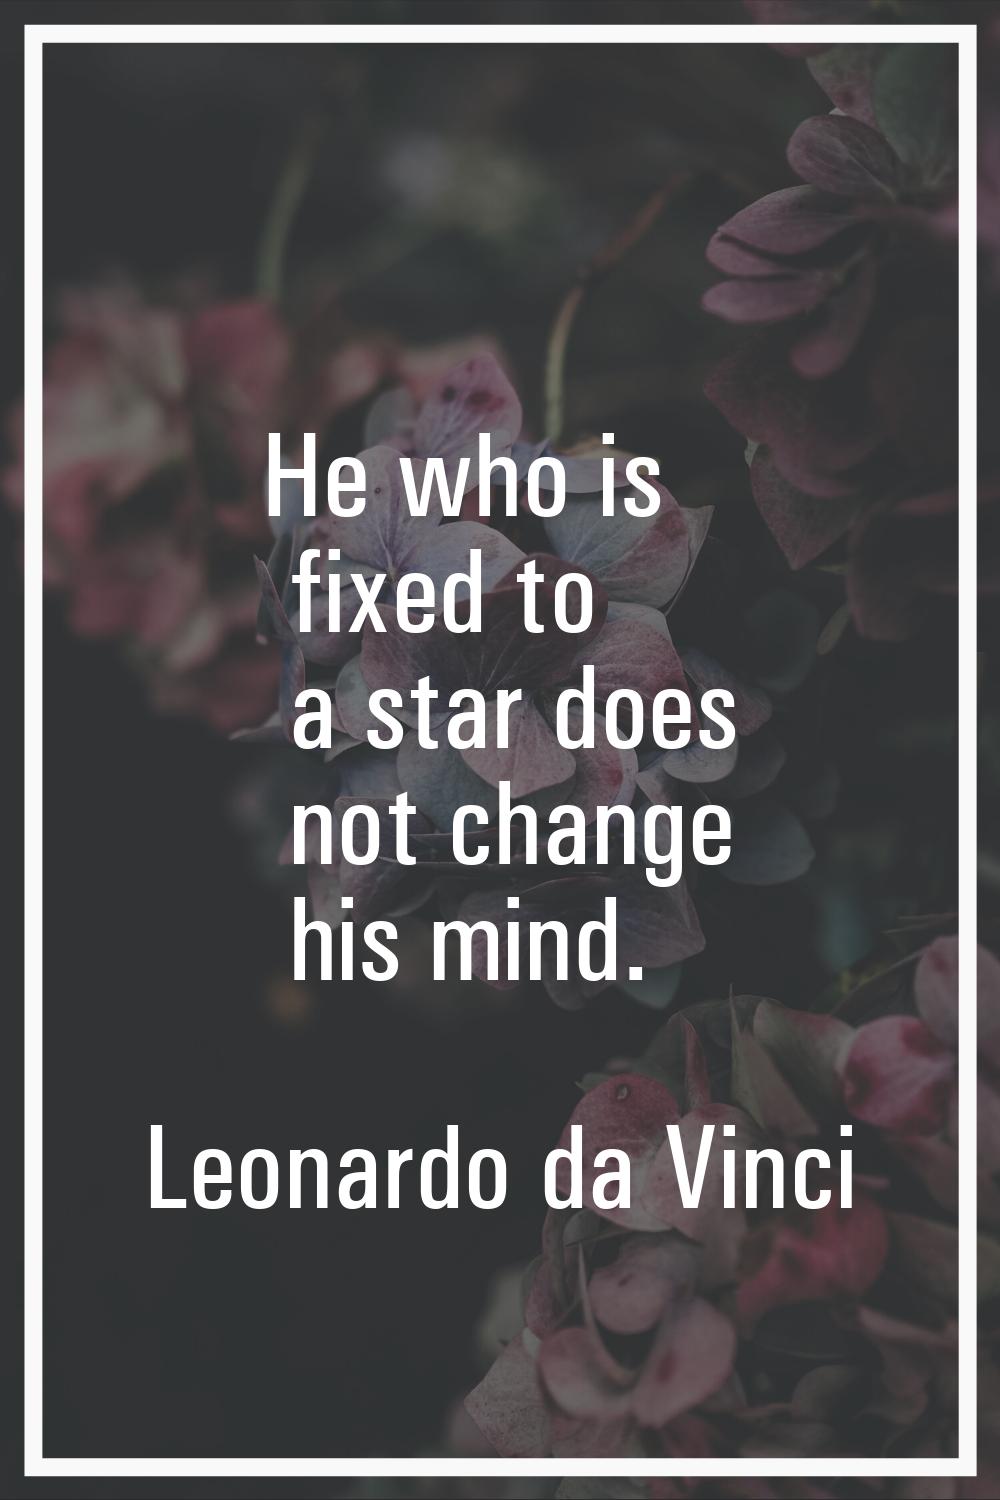 He who is fixed to a star does not change his mind.